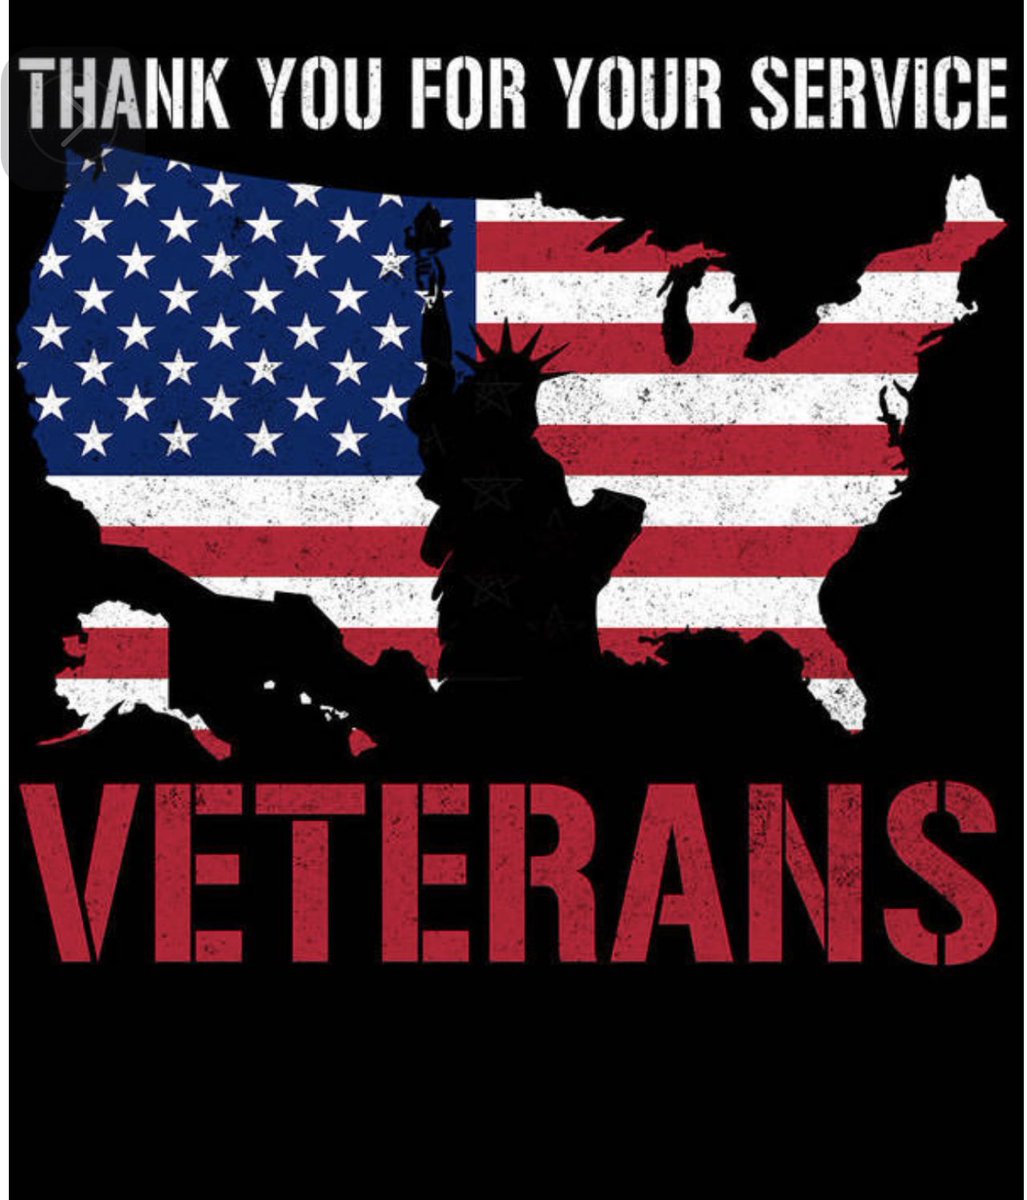 To all who served ❤️🇺🇸🫡 Thank you got your sacrifice #VeteransDay